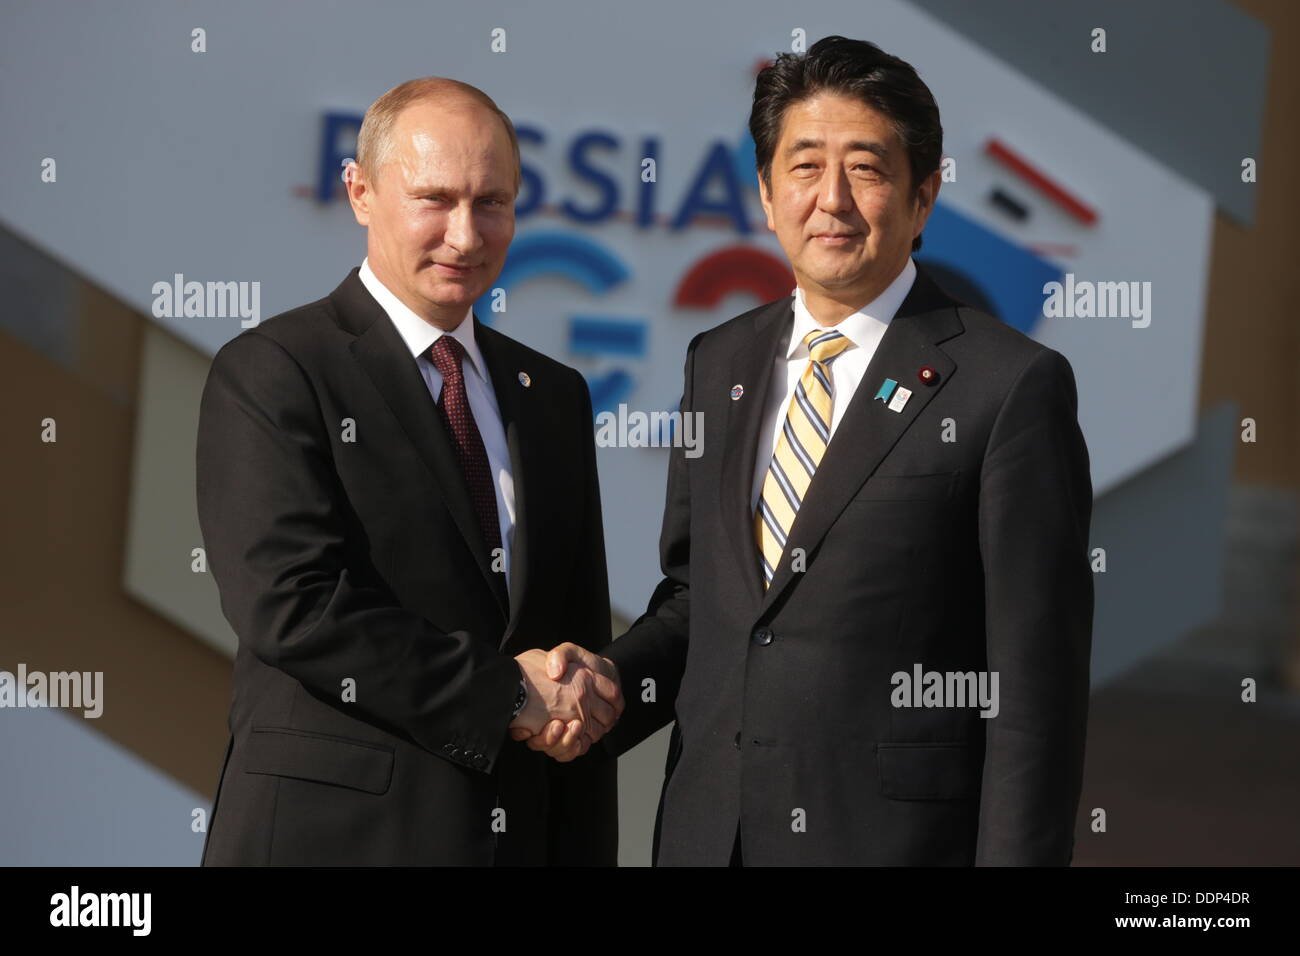 St. Petersburg, Russia. 05th Sep, 2013. Russian President Vladimir Putin (L) welcomes Japan's Prime Minister Shinzo Abe for the G20 summit at the Constantine Palace in St. Petersburg, Russia, 05 September 2013. The G20 summit takes place from 05 to 06 September. Photo: Kay Nietfeld/dpa/Alamy Live News Stock Photo